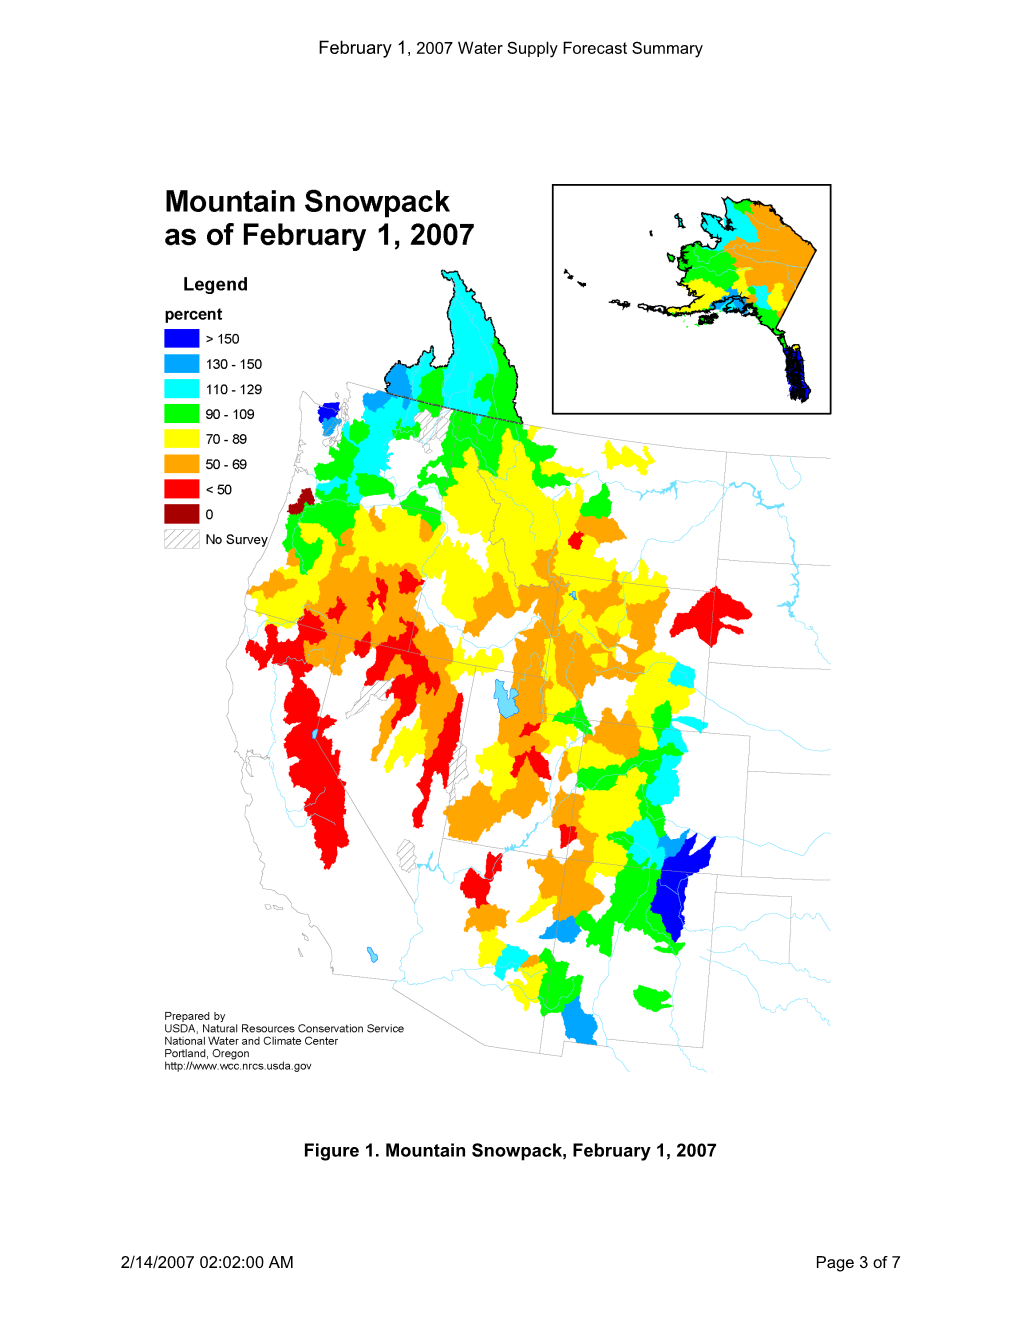 Subject:February 1, 2007Western Snowpack Conditions and Water Supply Forecasts